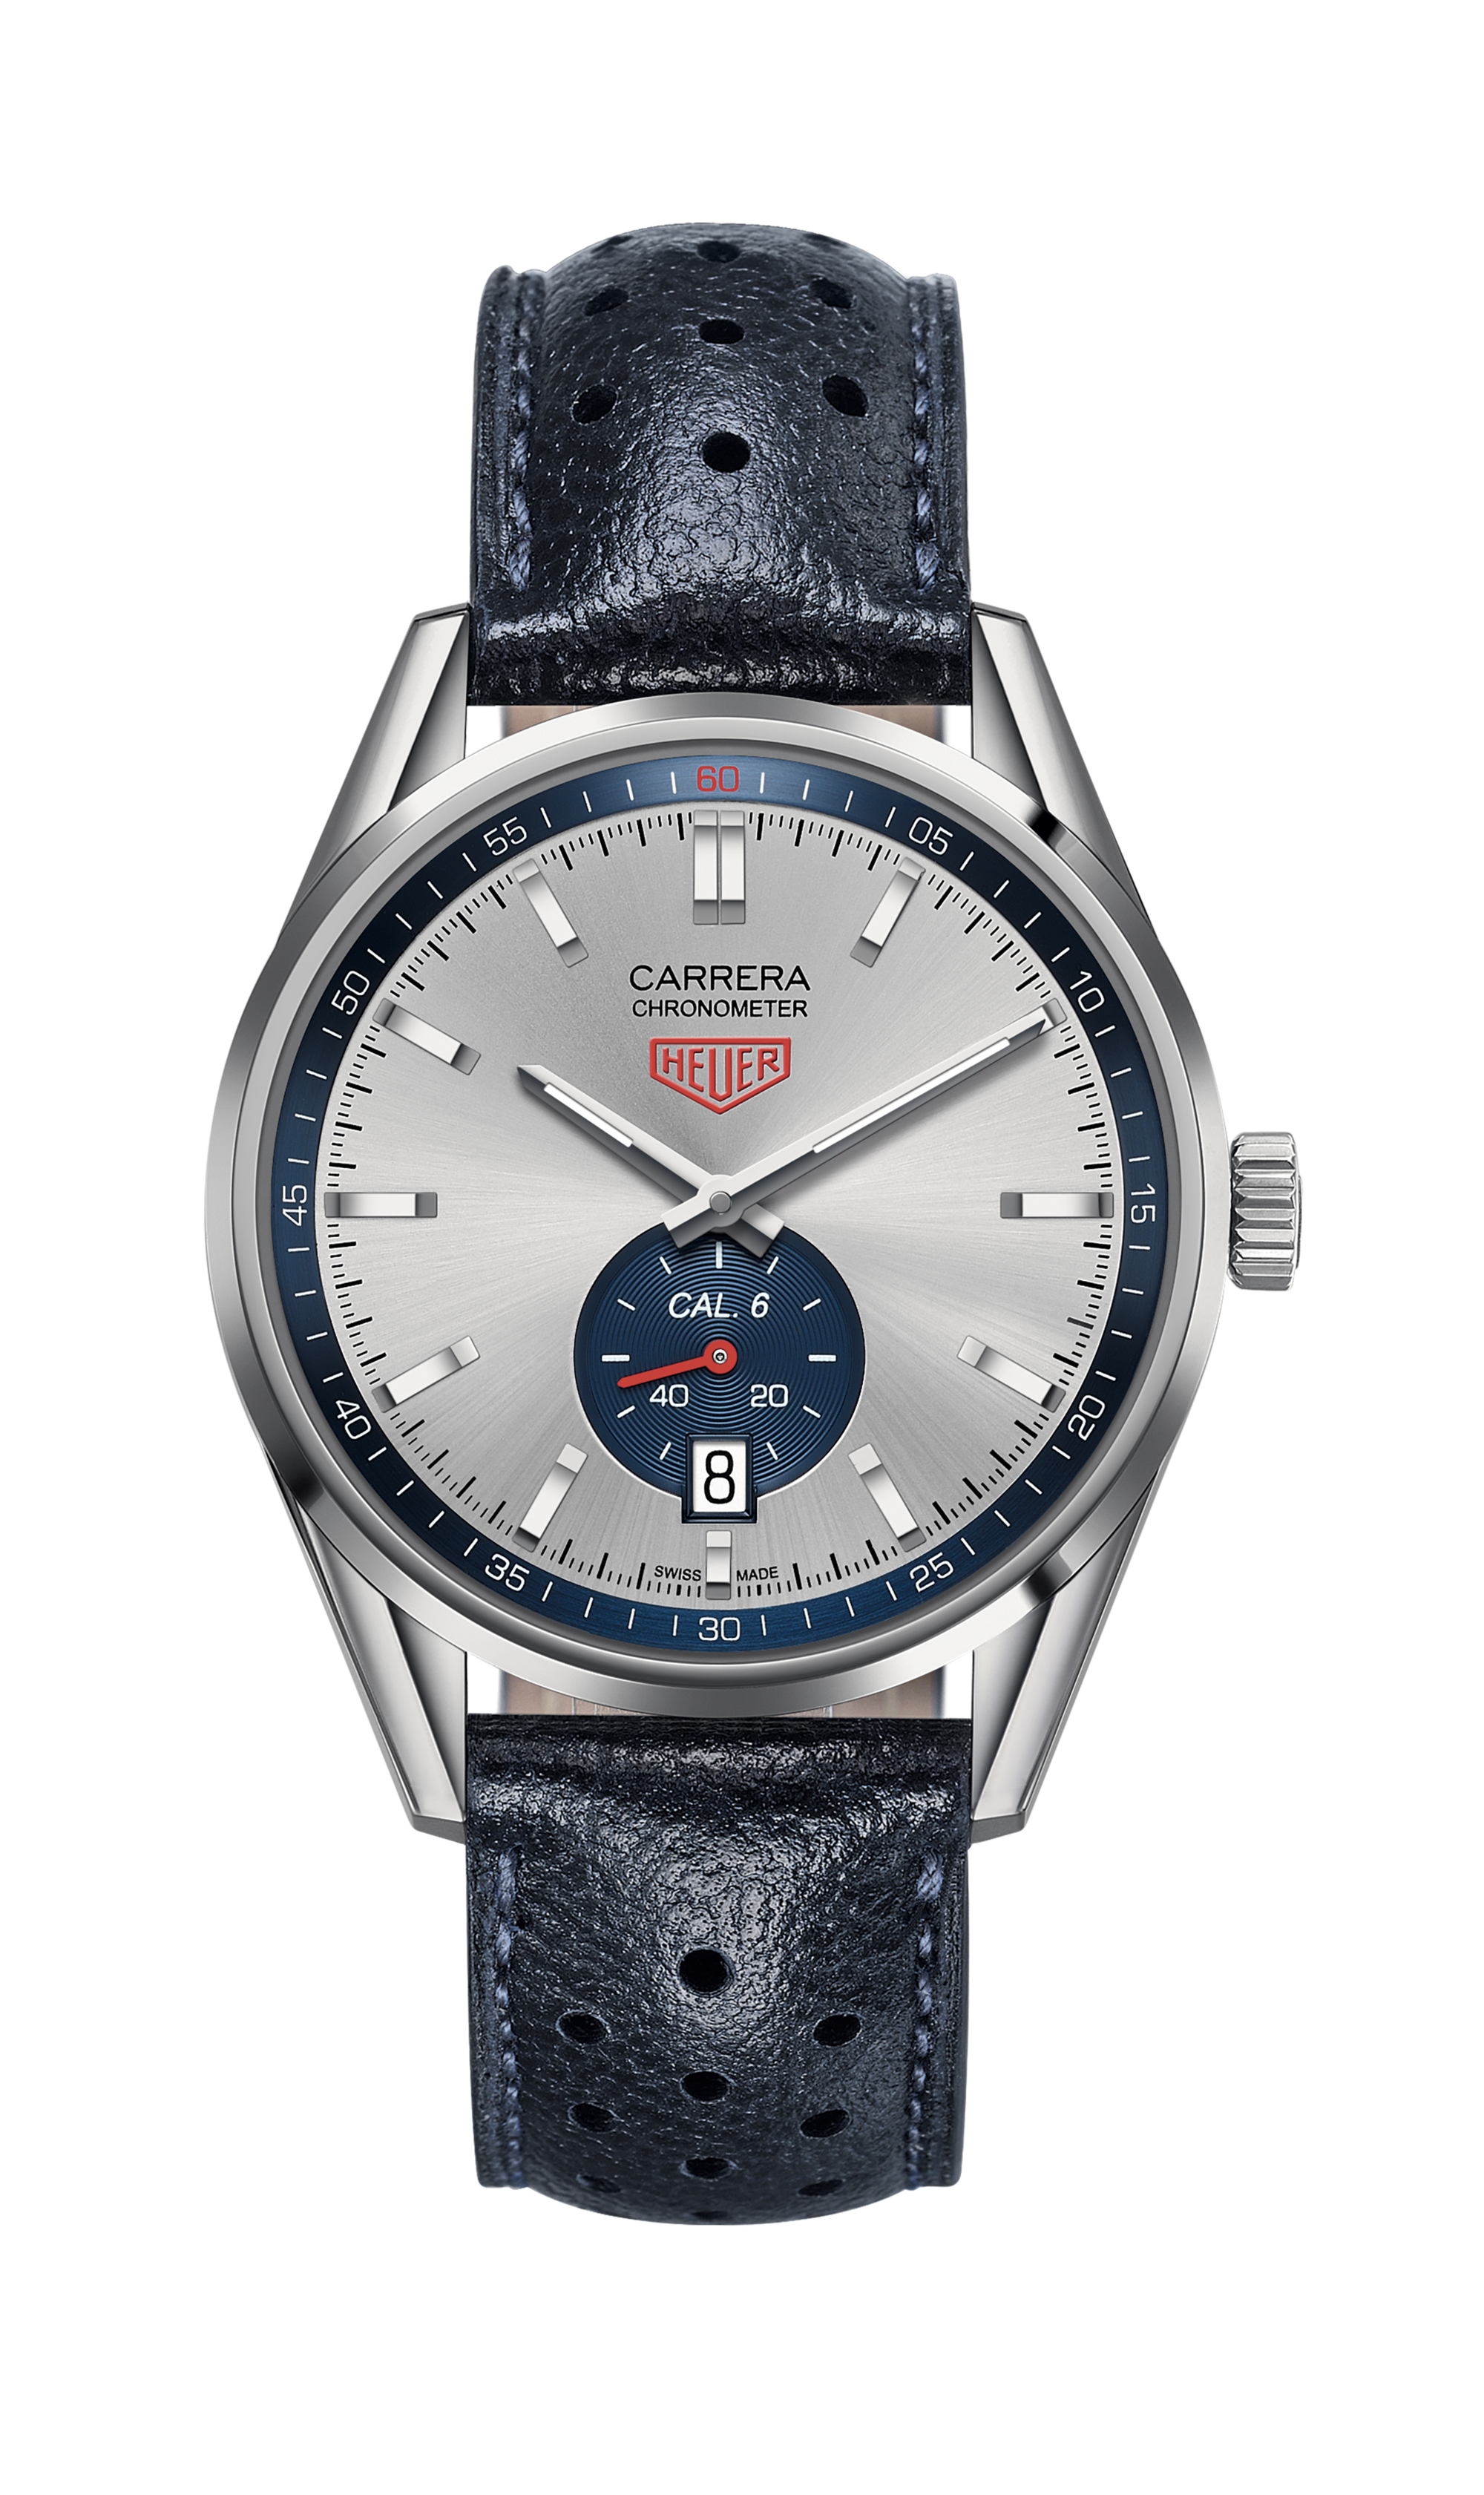 TAG Heuer Carrera Calibre 16 for $1,966 for sale from a Private